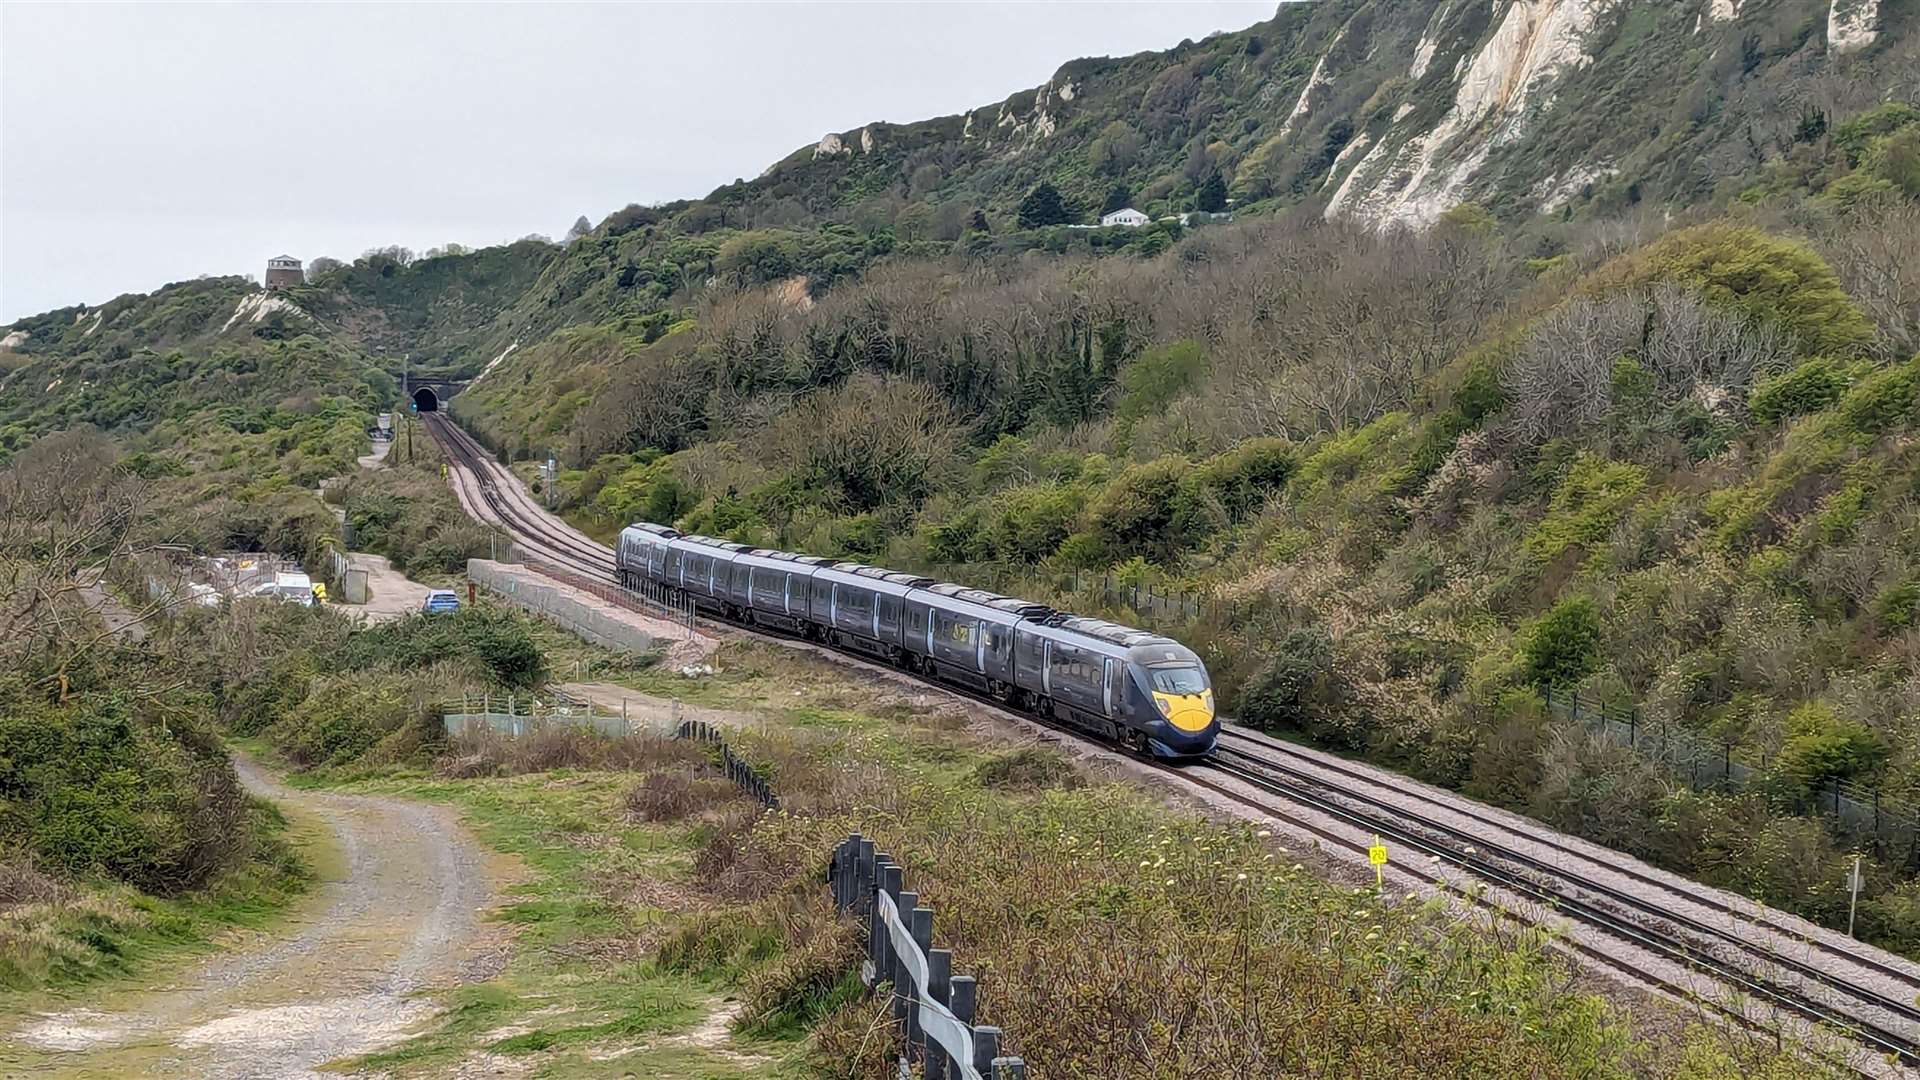 A Southeastern high-speed train running between Folkestone and Dover